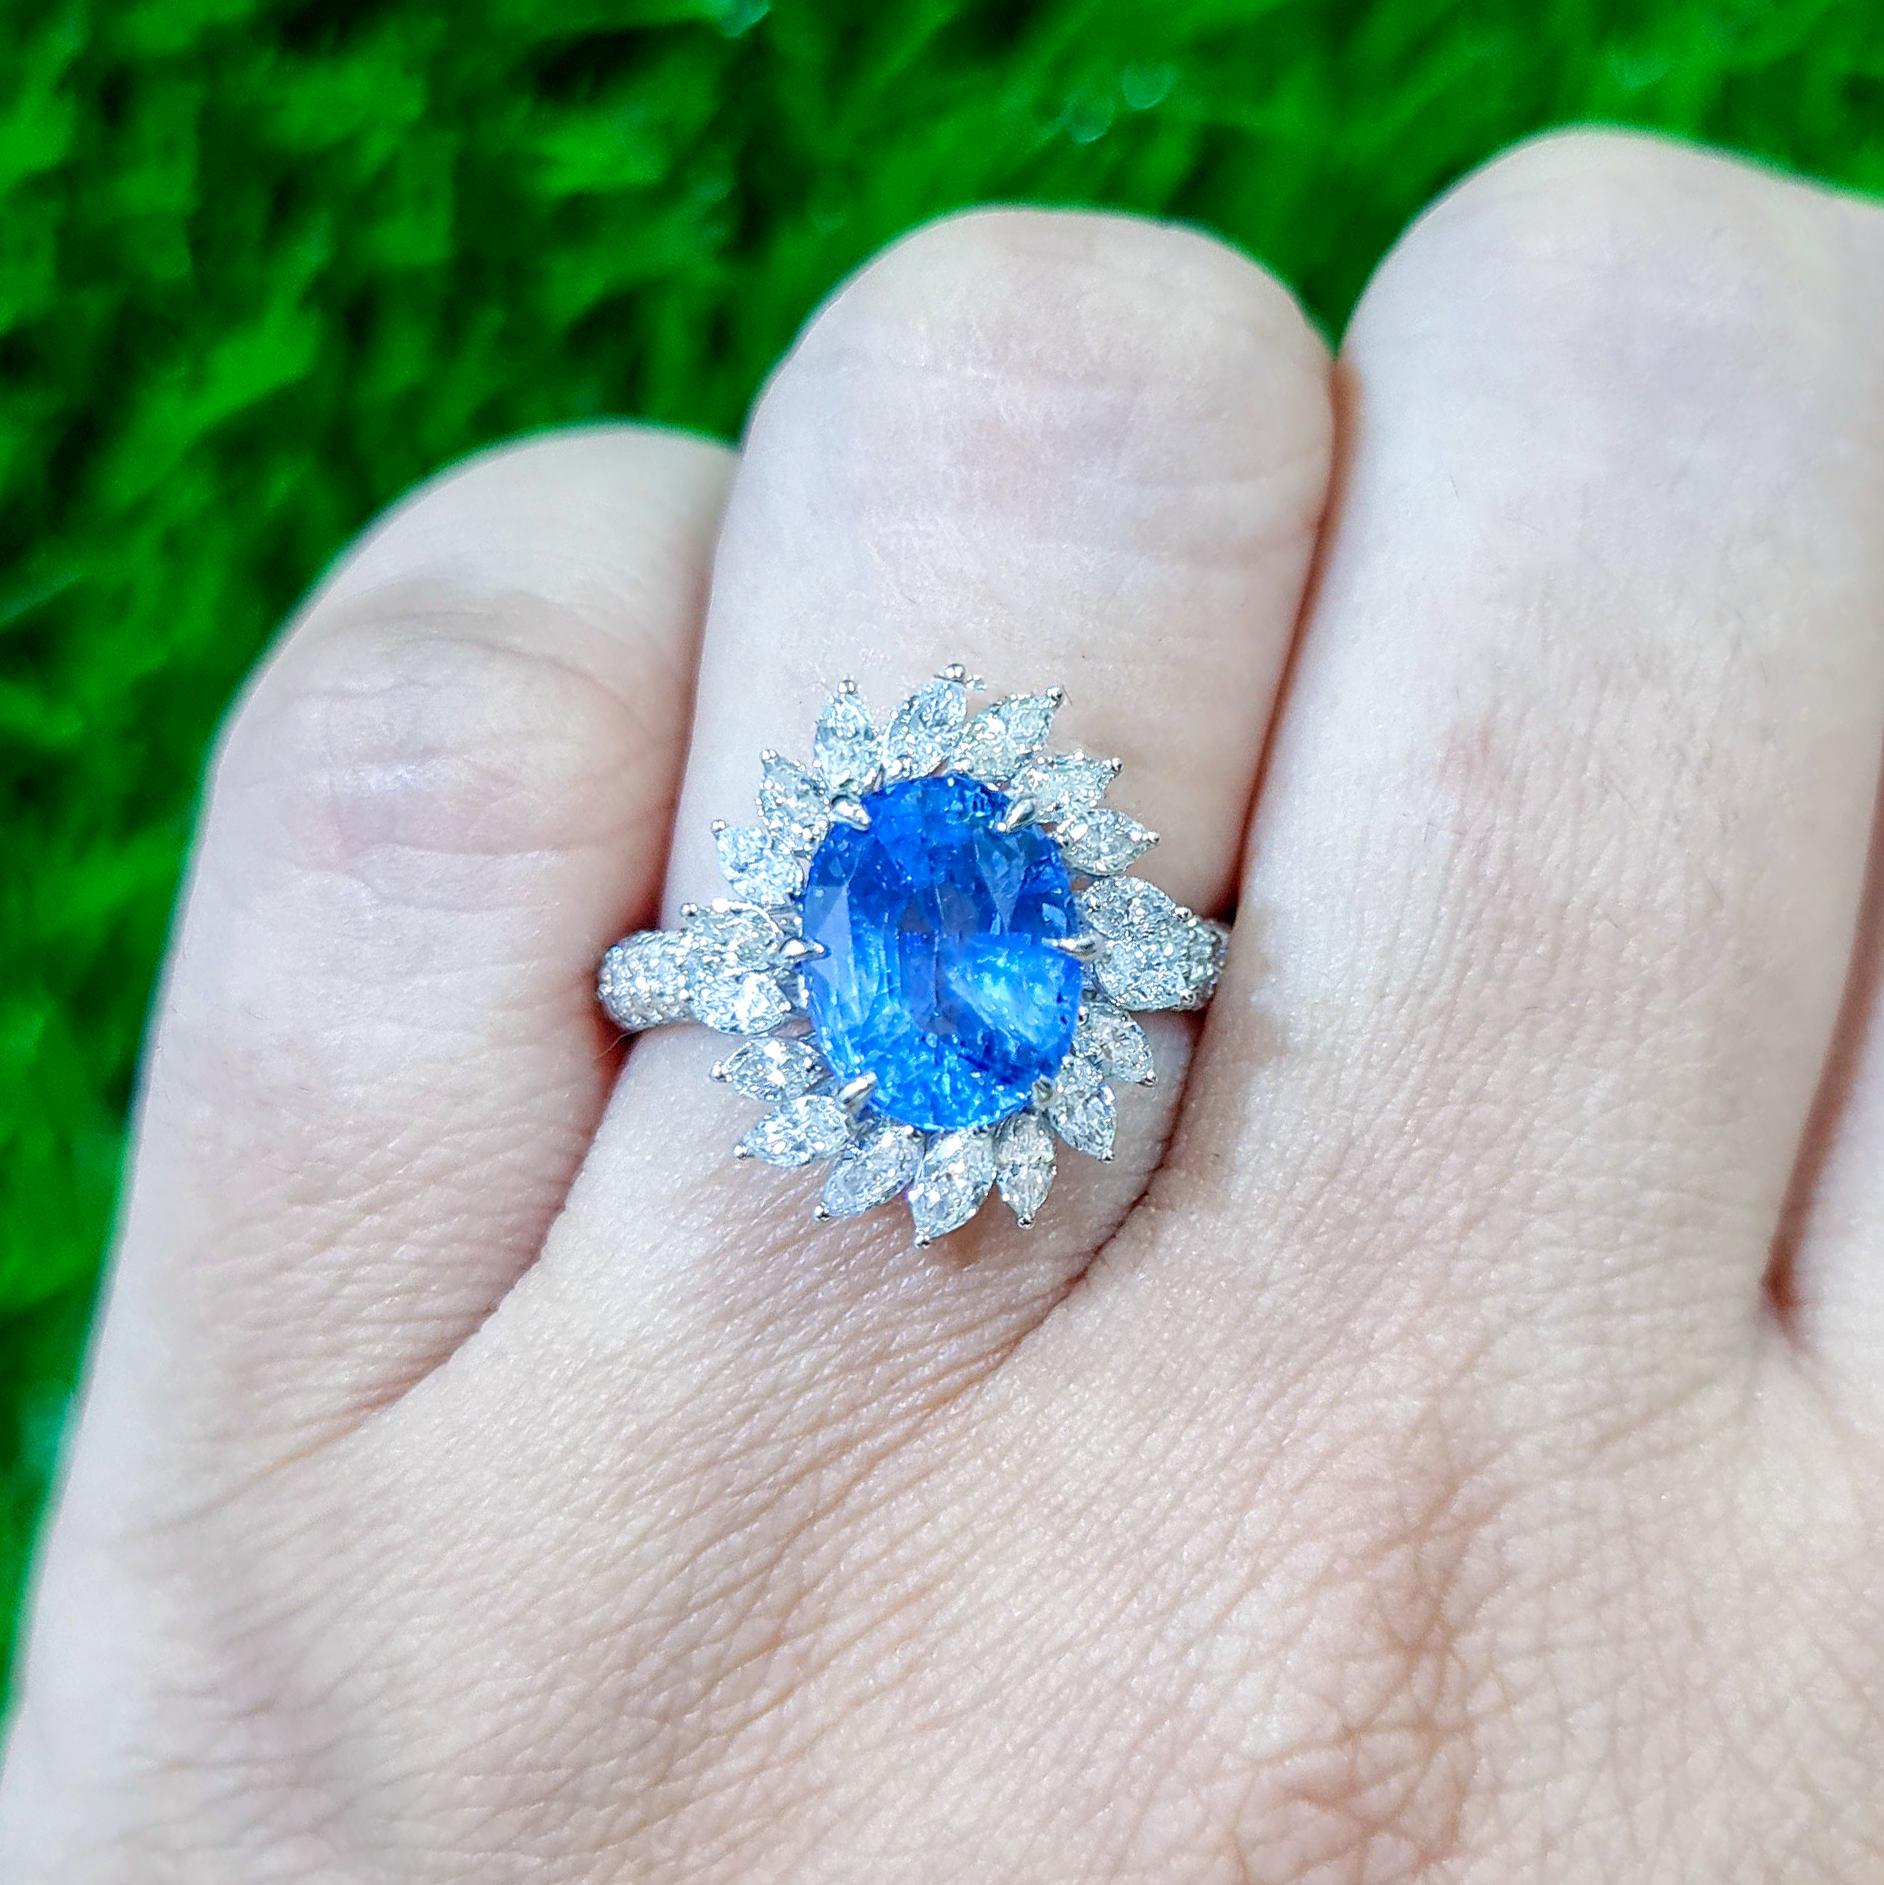 It comes with the appraisal by GIA GG/AJP
All Gemstones are Natural
Blue Sapphire = 3.32 Carat
Diamonds = 2.50 Carats
Metal: 18K White Gold
Ring Size: 7* US
*It can be resized complimentary